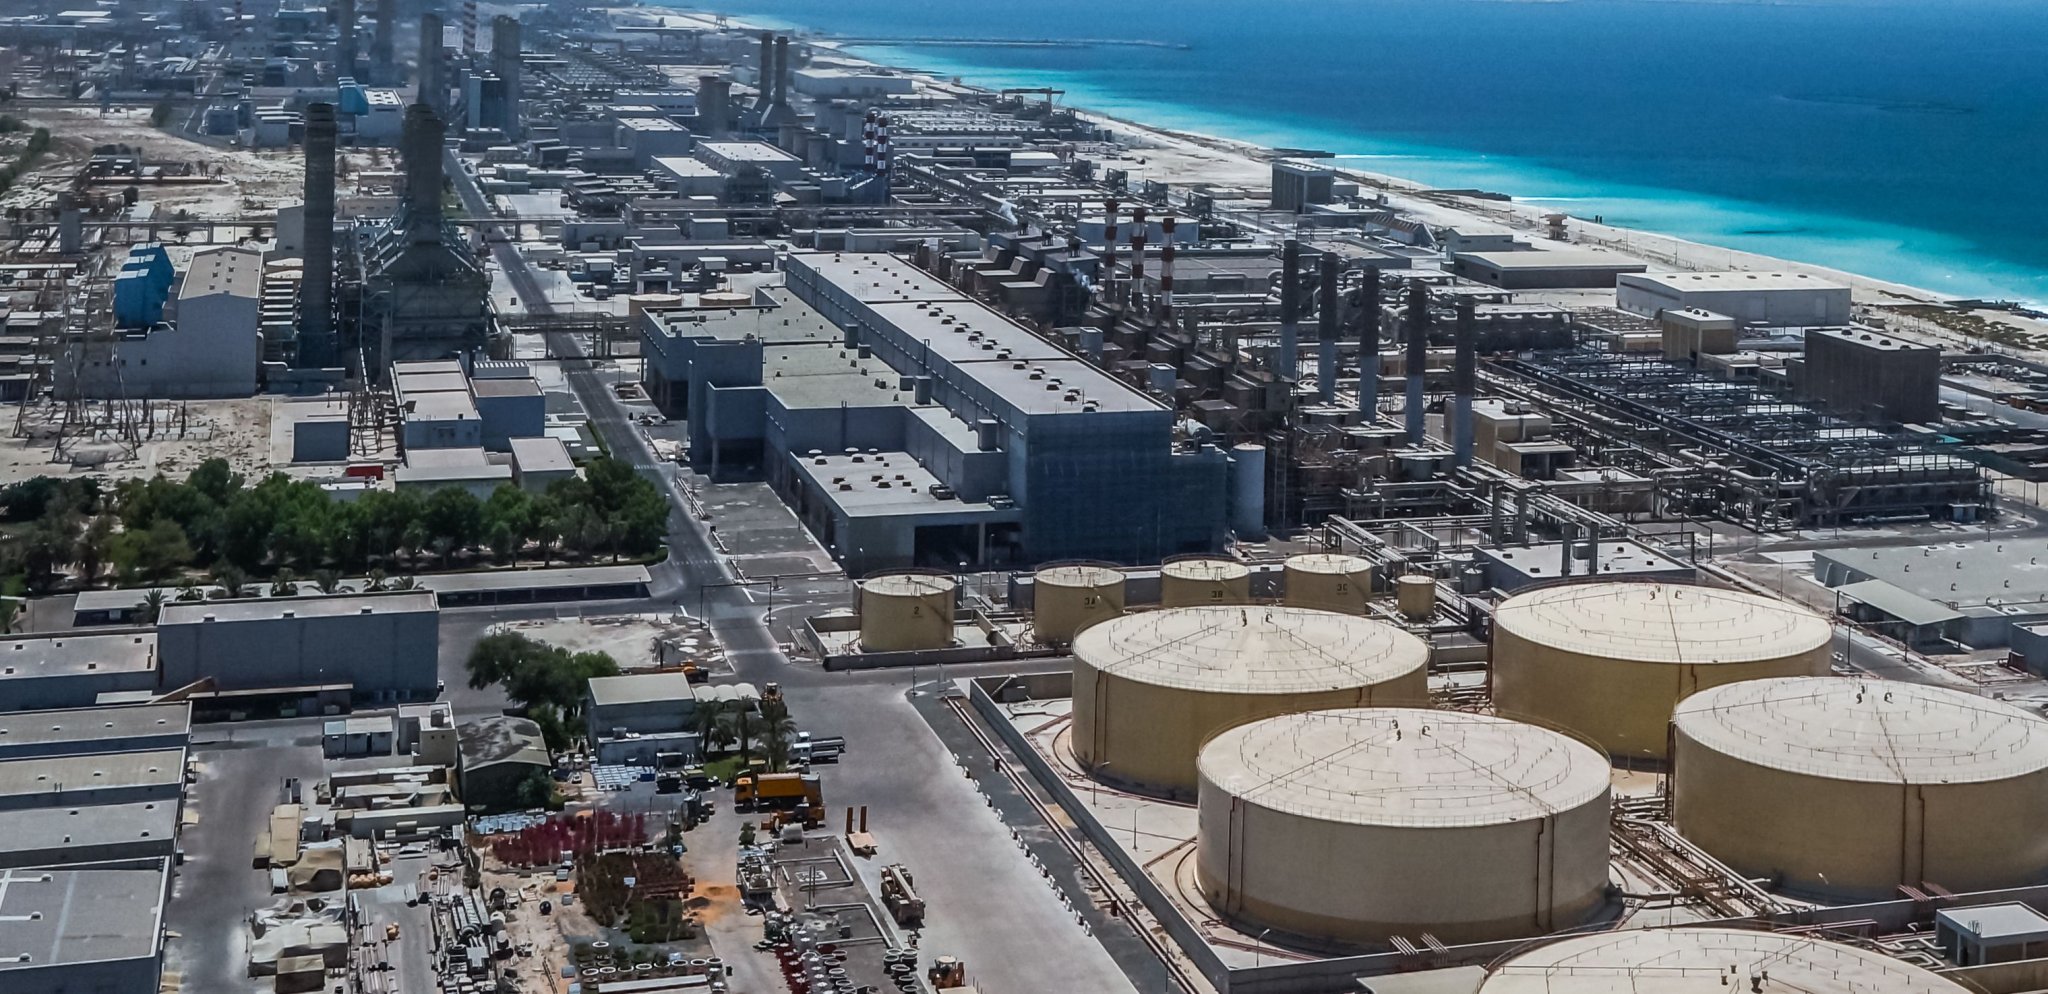 What Is Desalination? Overview and Impact